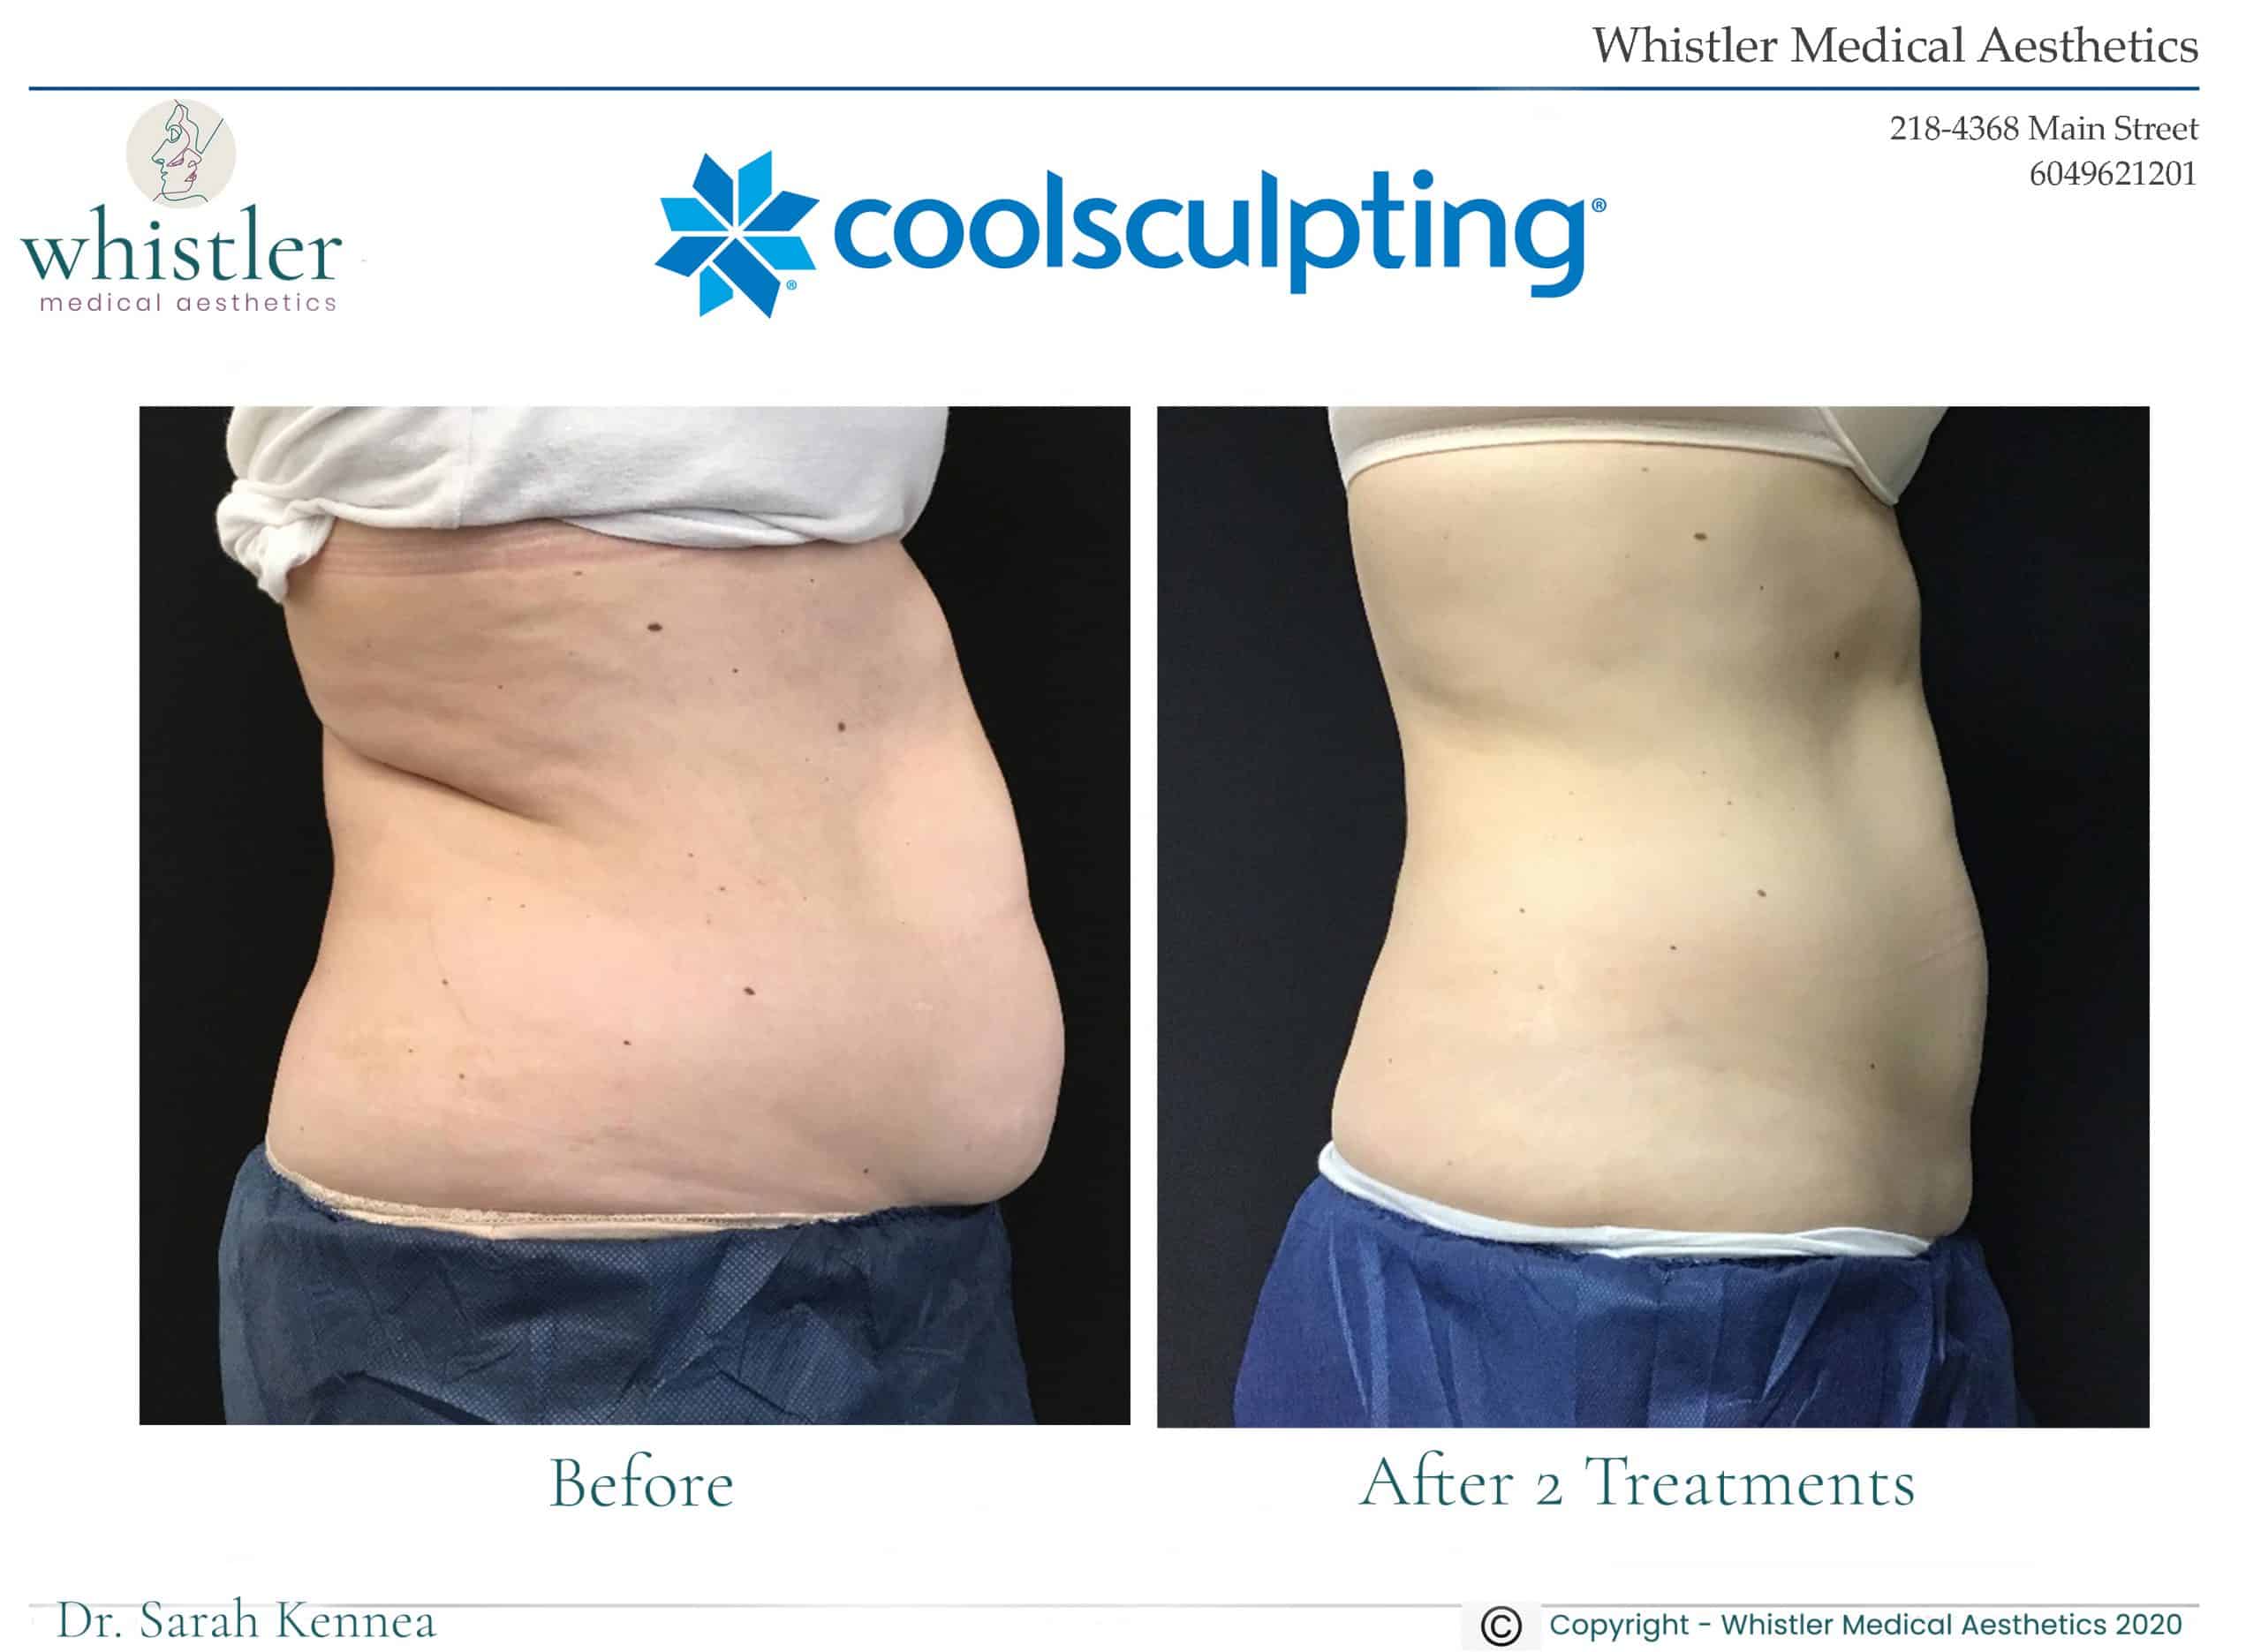 Does Coolsculpting work?